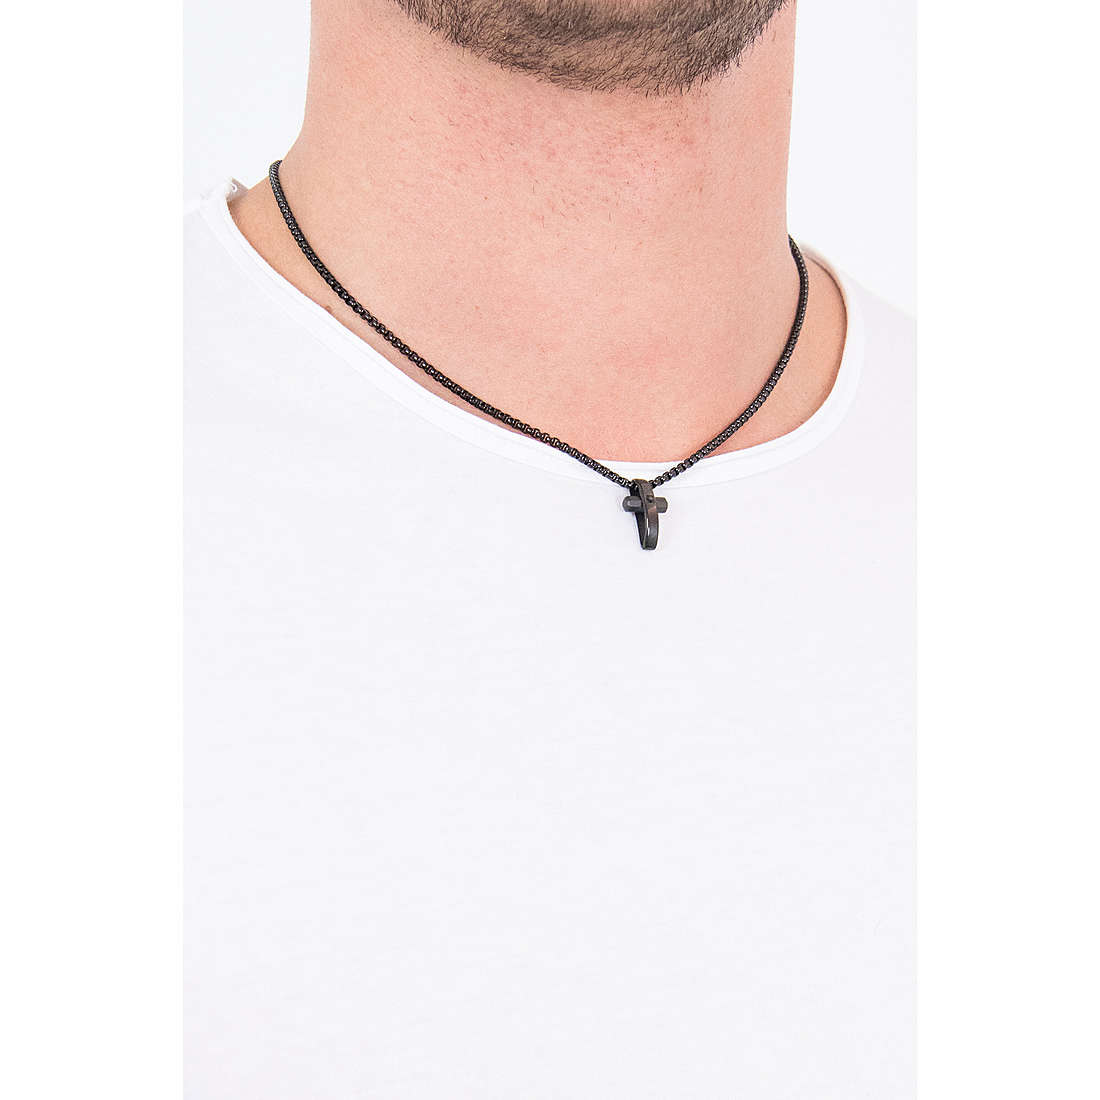 Brosway necklaces Crux man BRX14 wearing